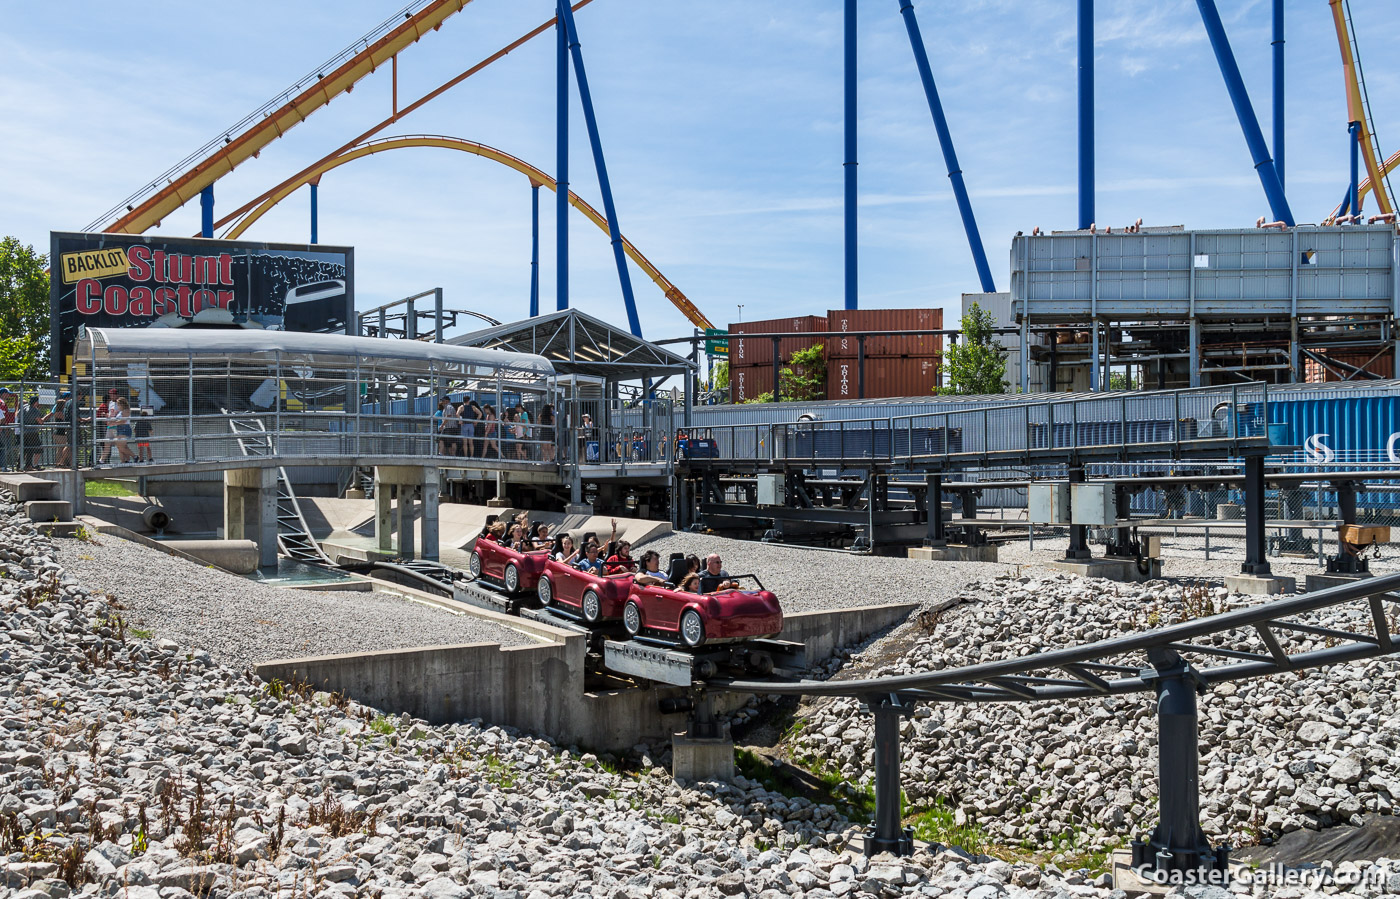 Pictures of the Back Lot Stunt Coaster at Canada's Wonderland